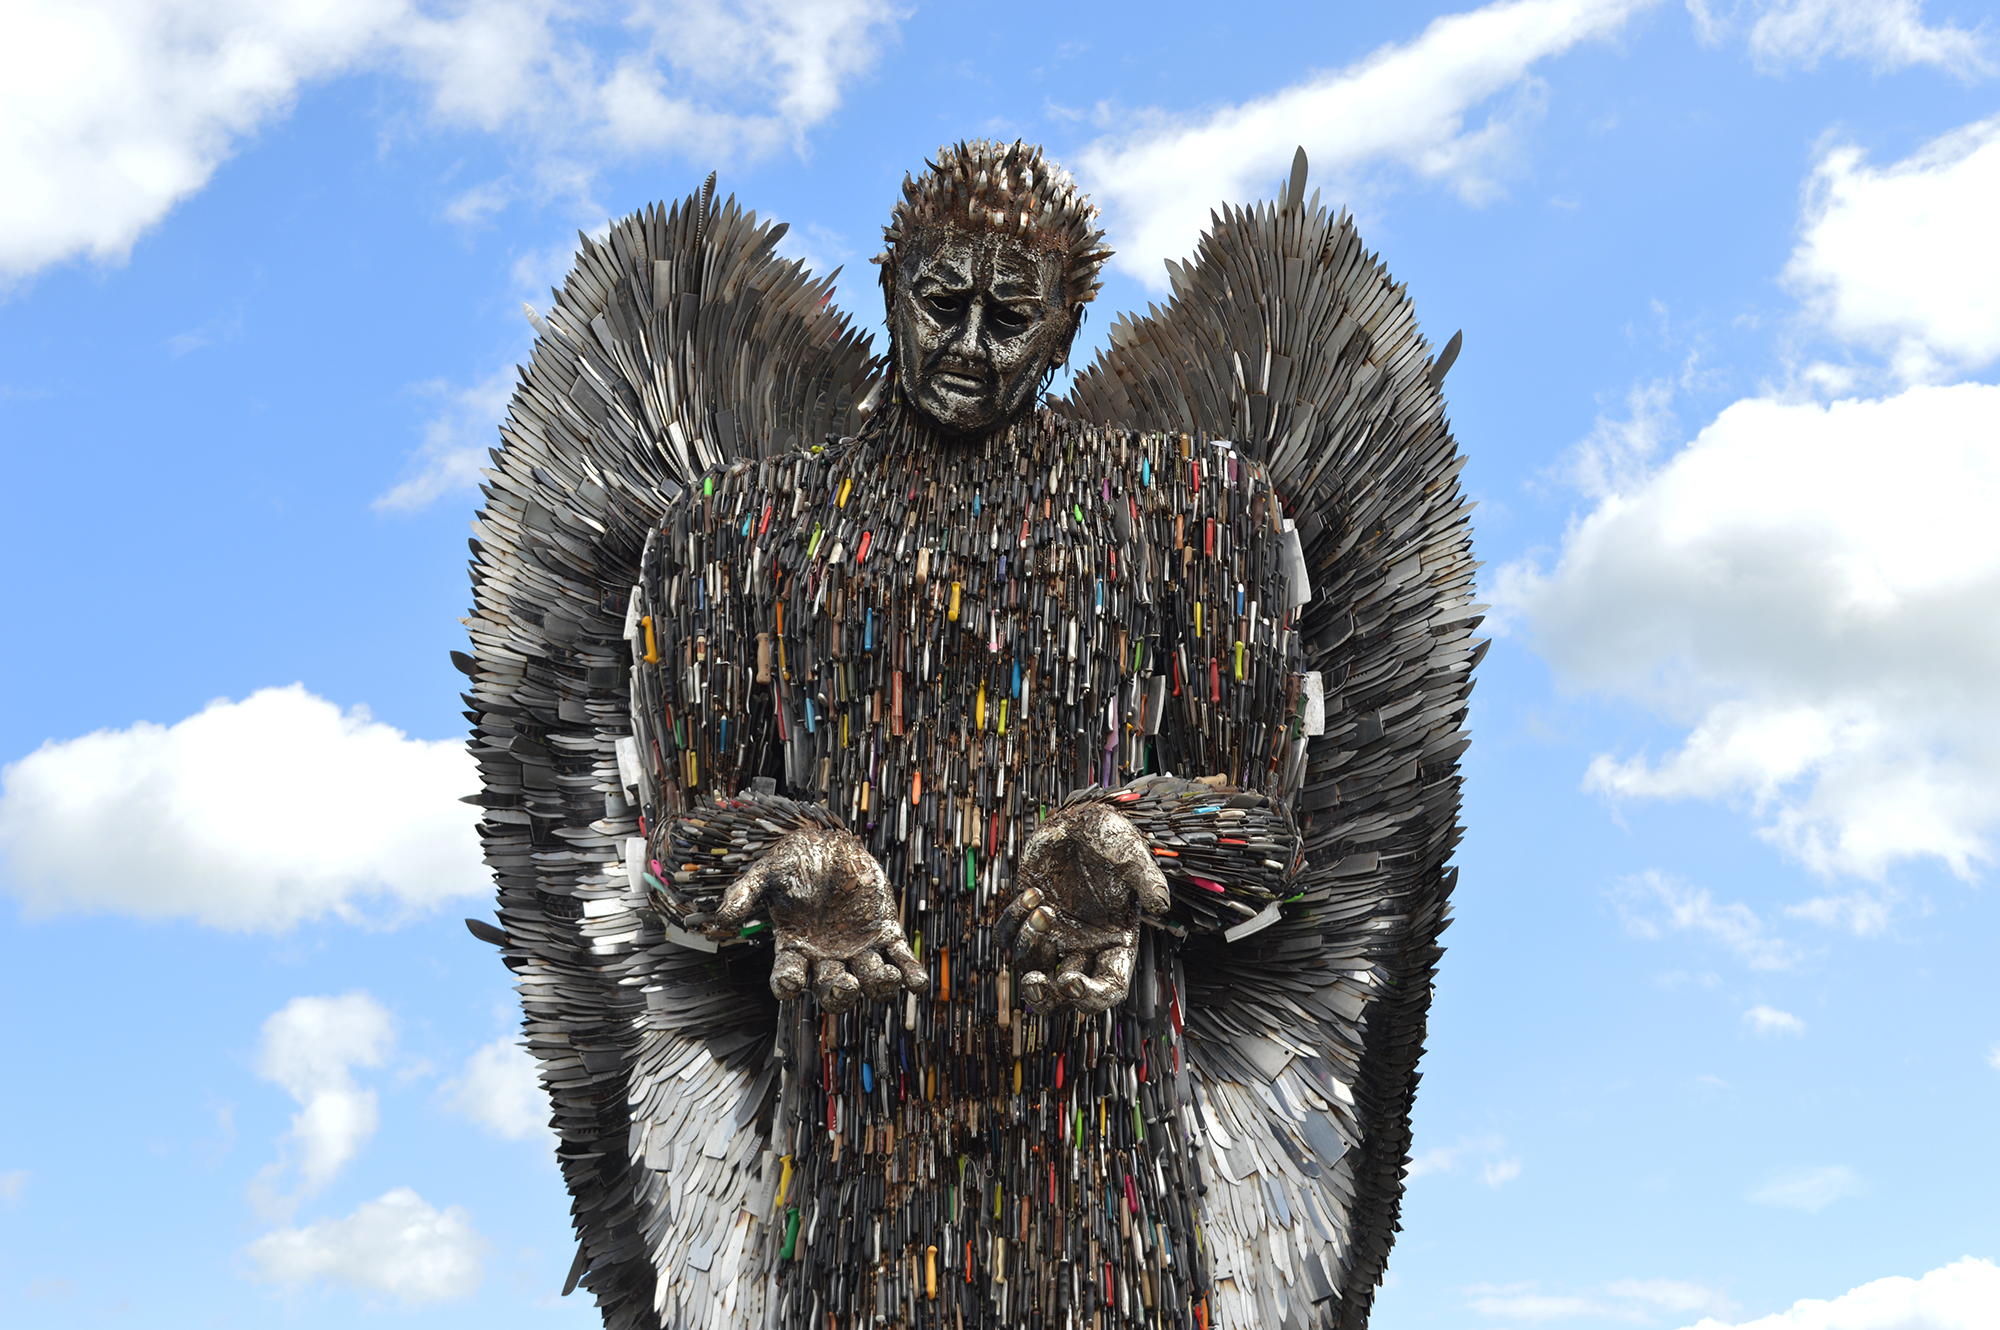 The Knife Angel is coming to Lichfield.